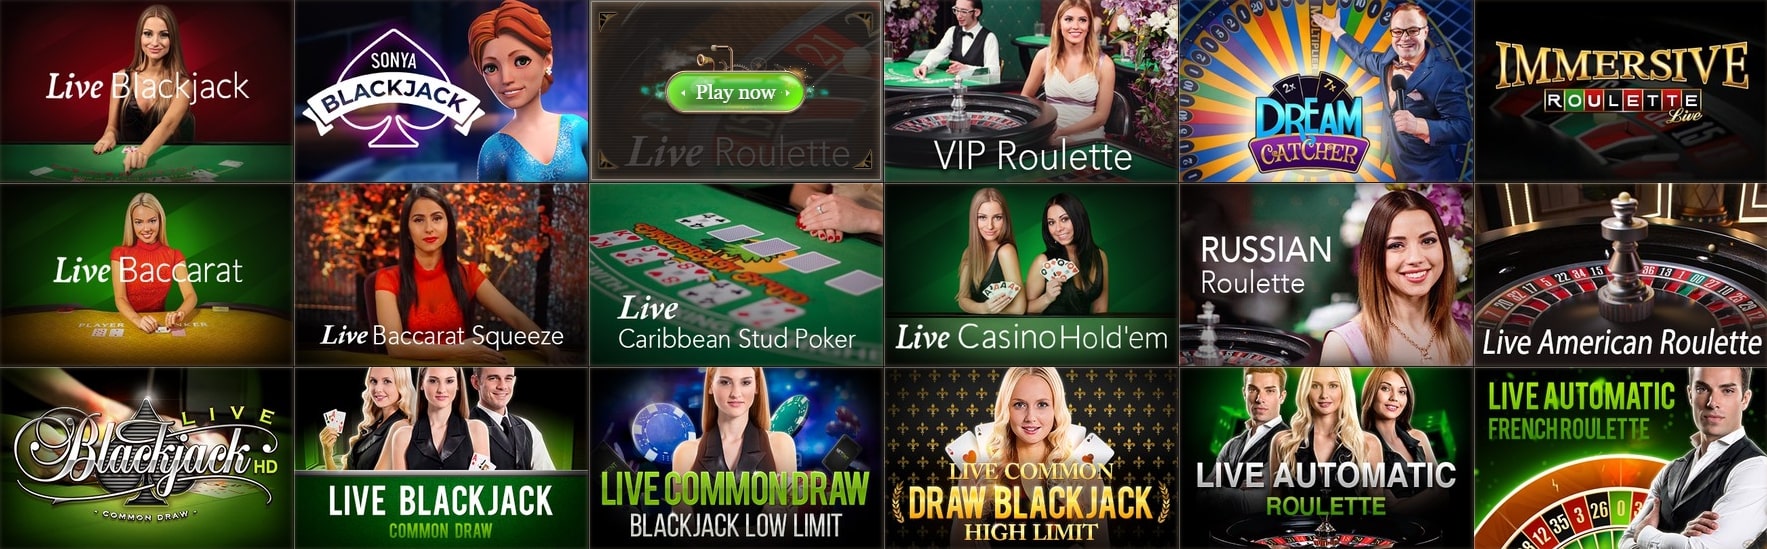 JoyCasino Games With Live Dealers